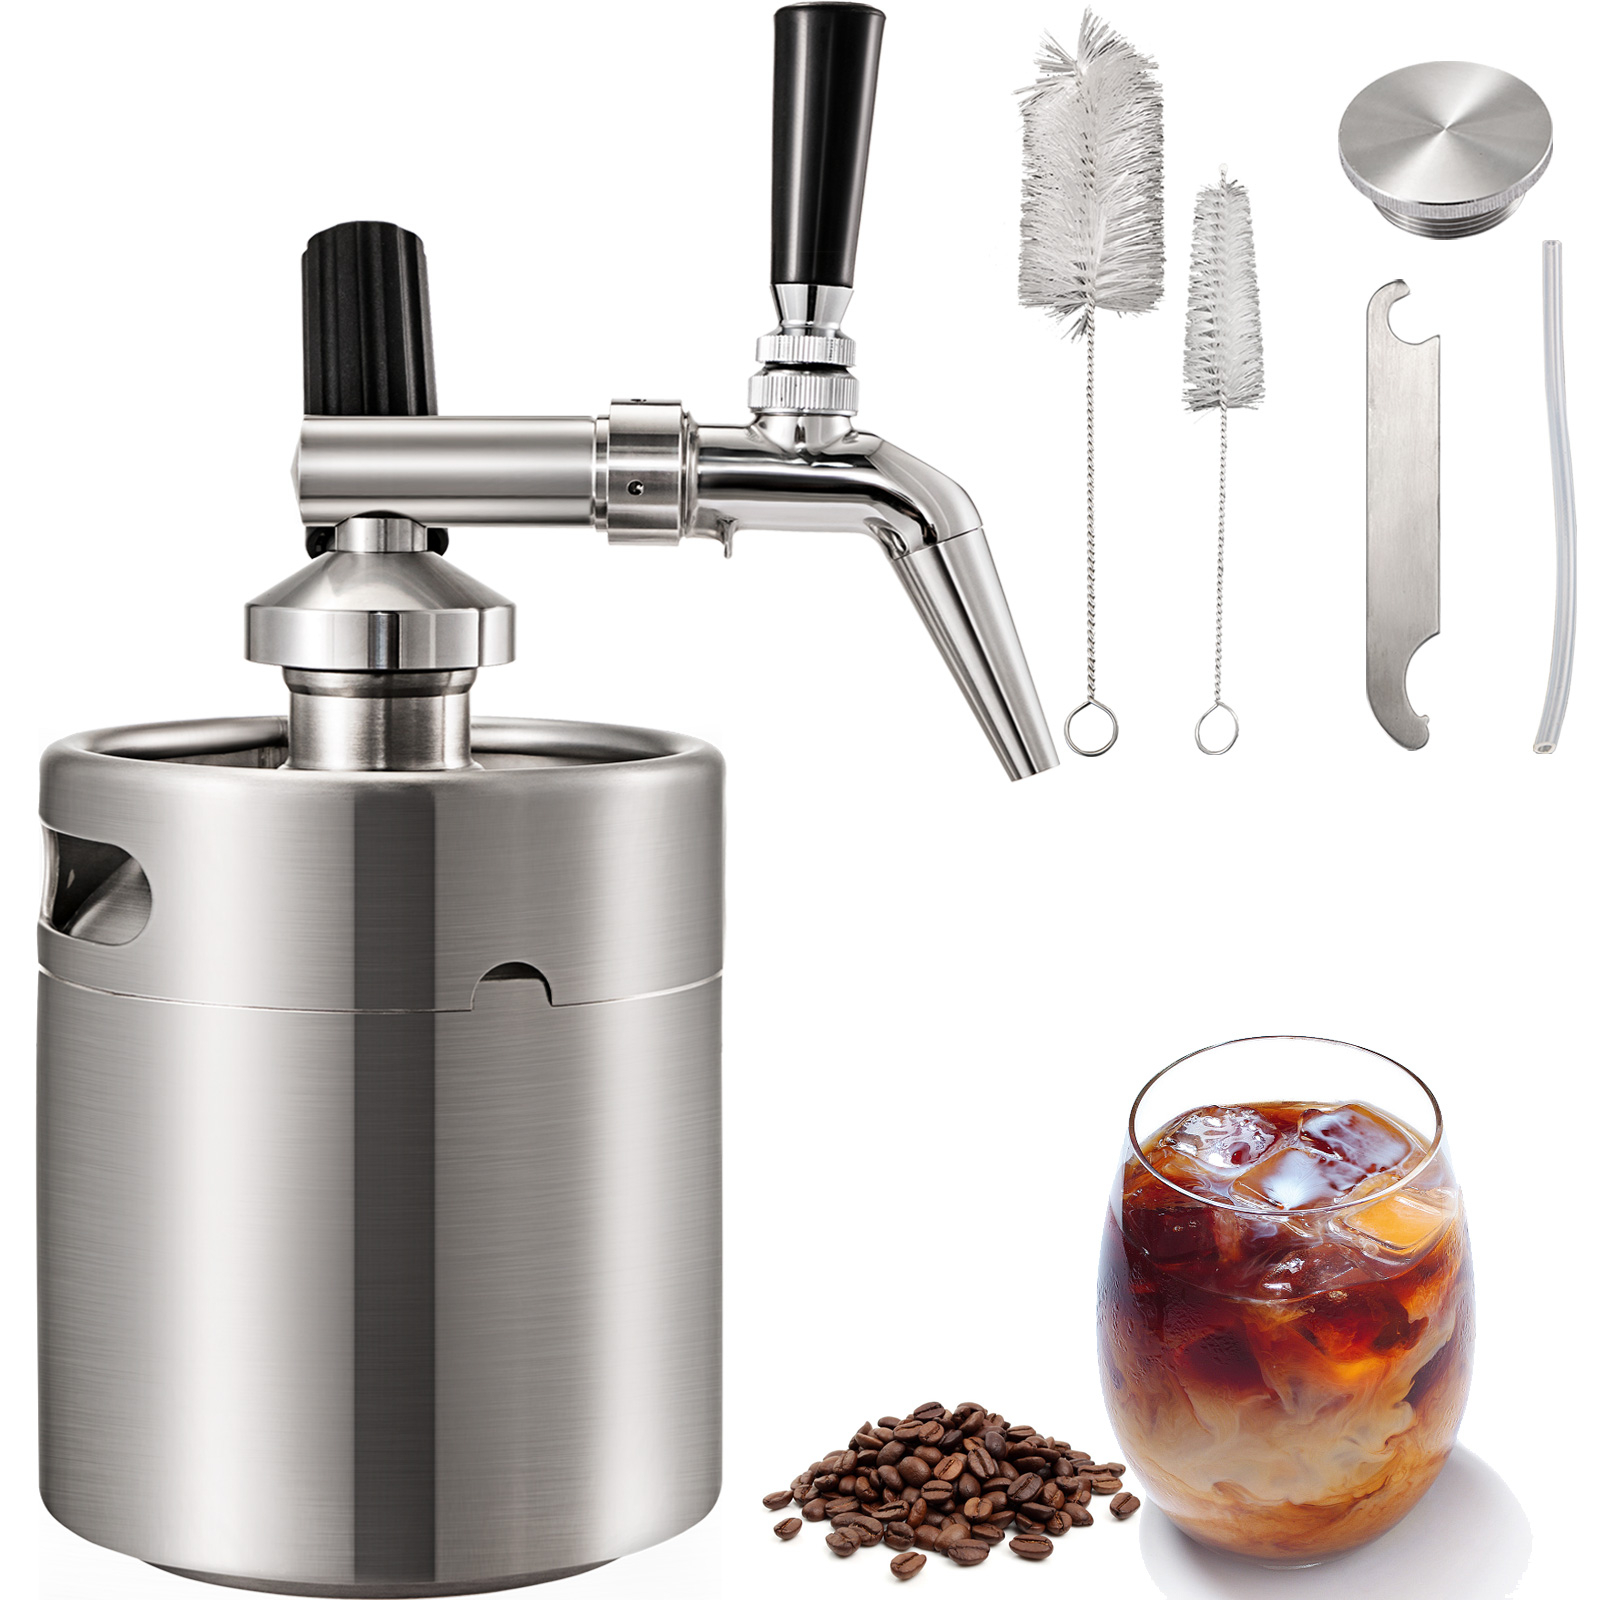 Cold　Nitro　67Oz　Cold　Steel　2L　With　Kit　Coffee　Maker　Keg　Portable　Home　Maker　VEVOR　Stainless　Maker　Portable　VEVOR　Coffee　VEVOR　Maker　Coffee　Nitro　Brew　System　Brew　Nitro　Coffee　Brew　Brushes　AU